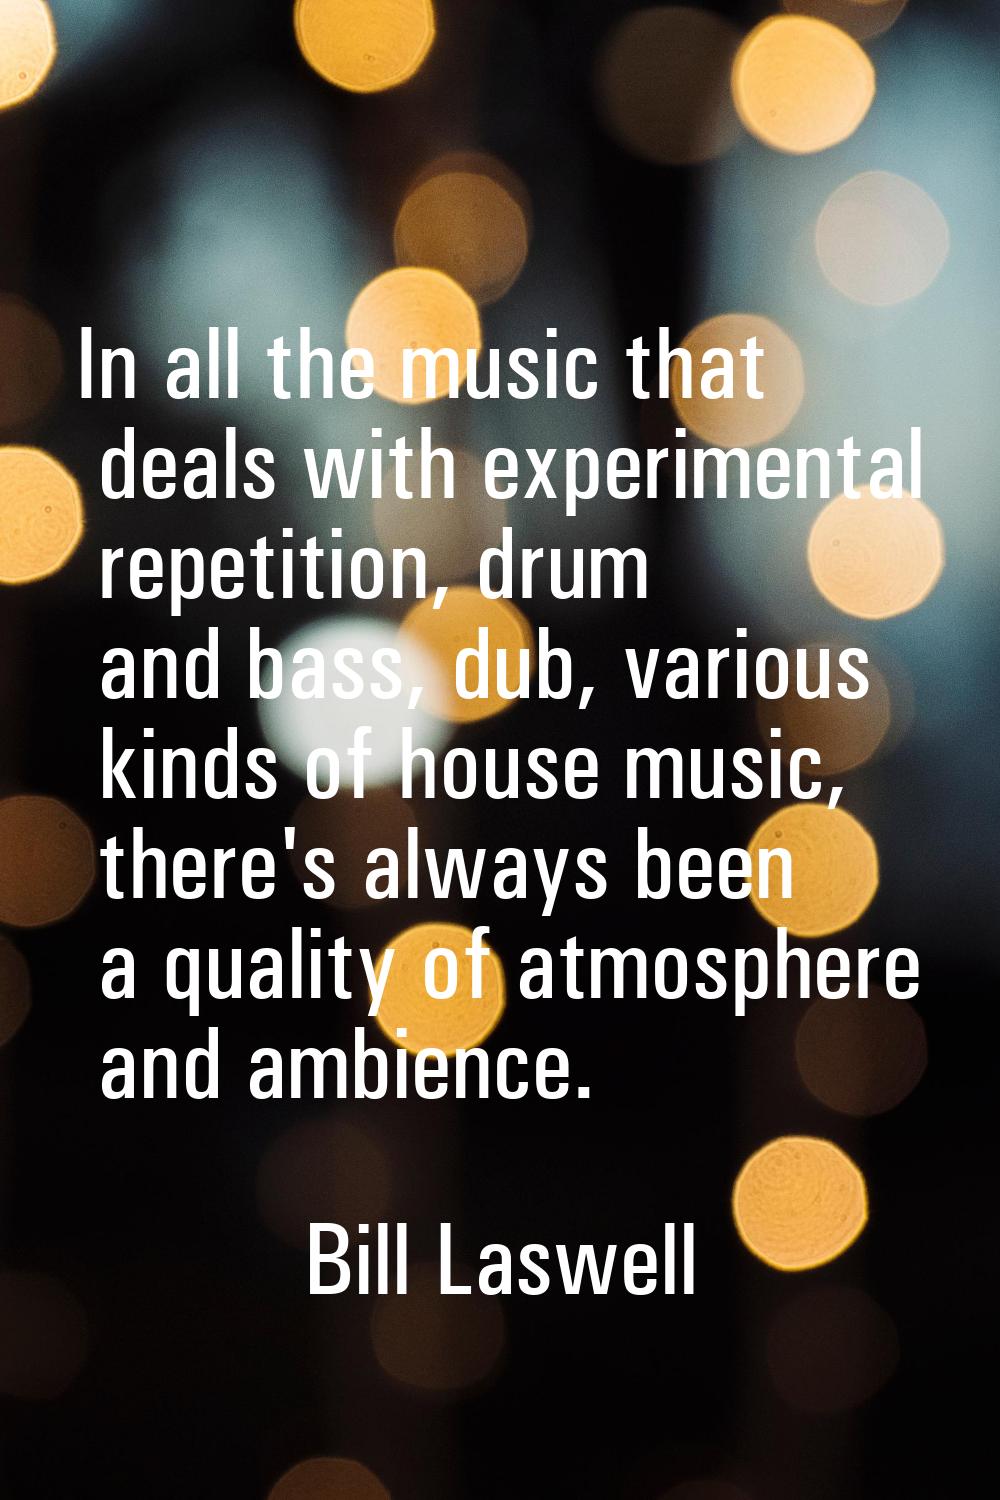 In all the music that deals with experimental repetition, drum and bass, dub, various kinds of hous